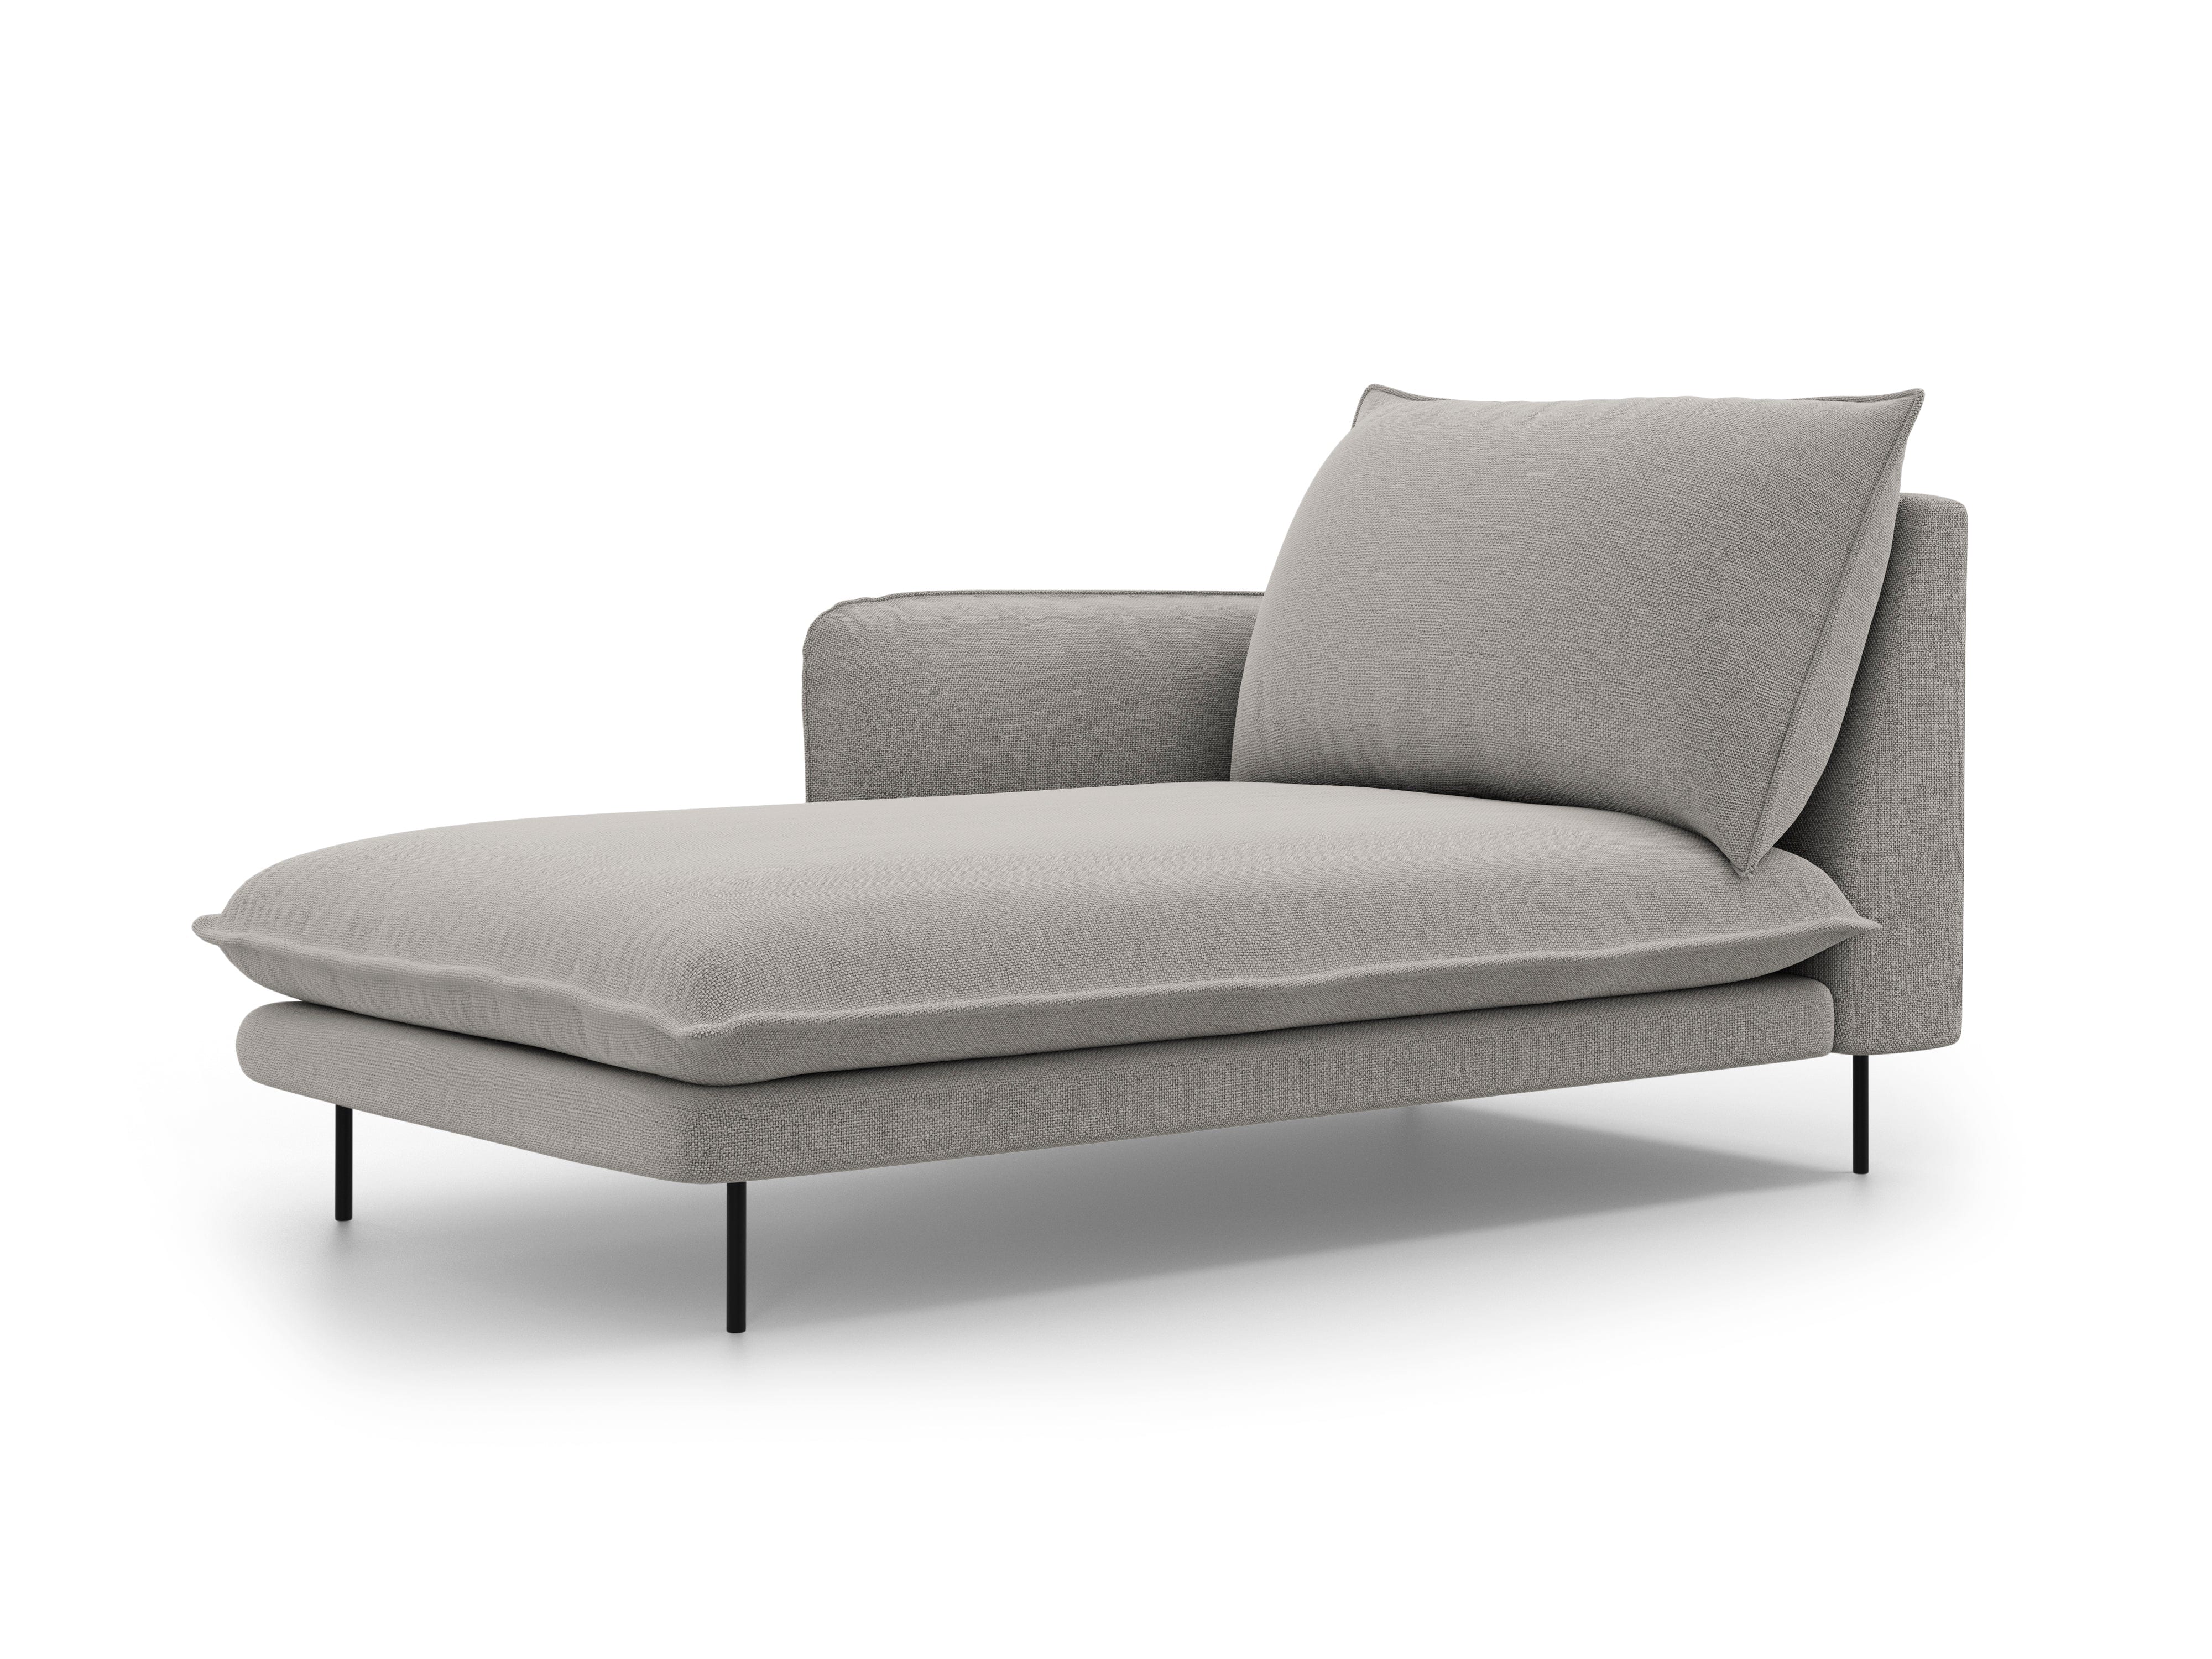 Lefthand chaise longue VIENNA light grey with black base